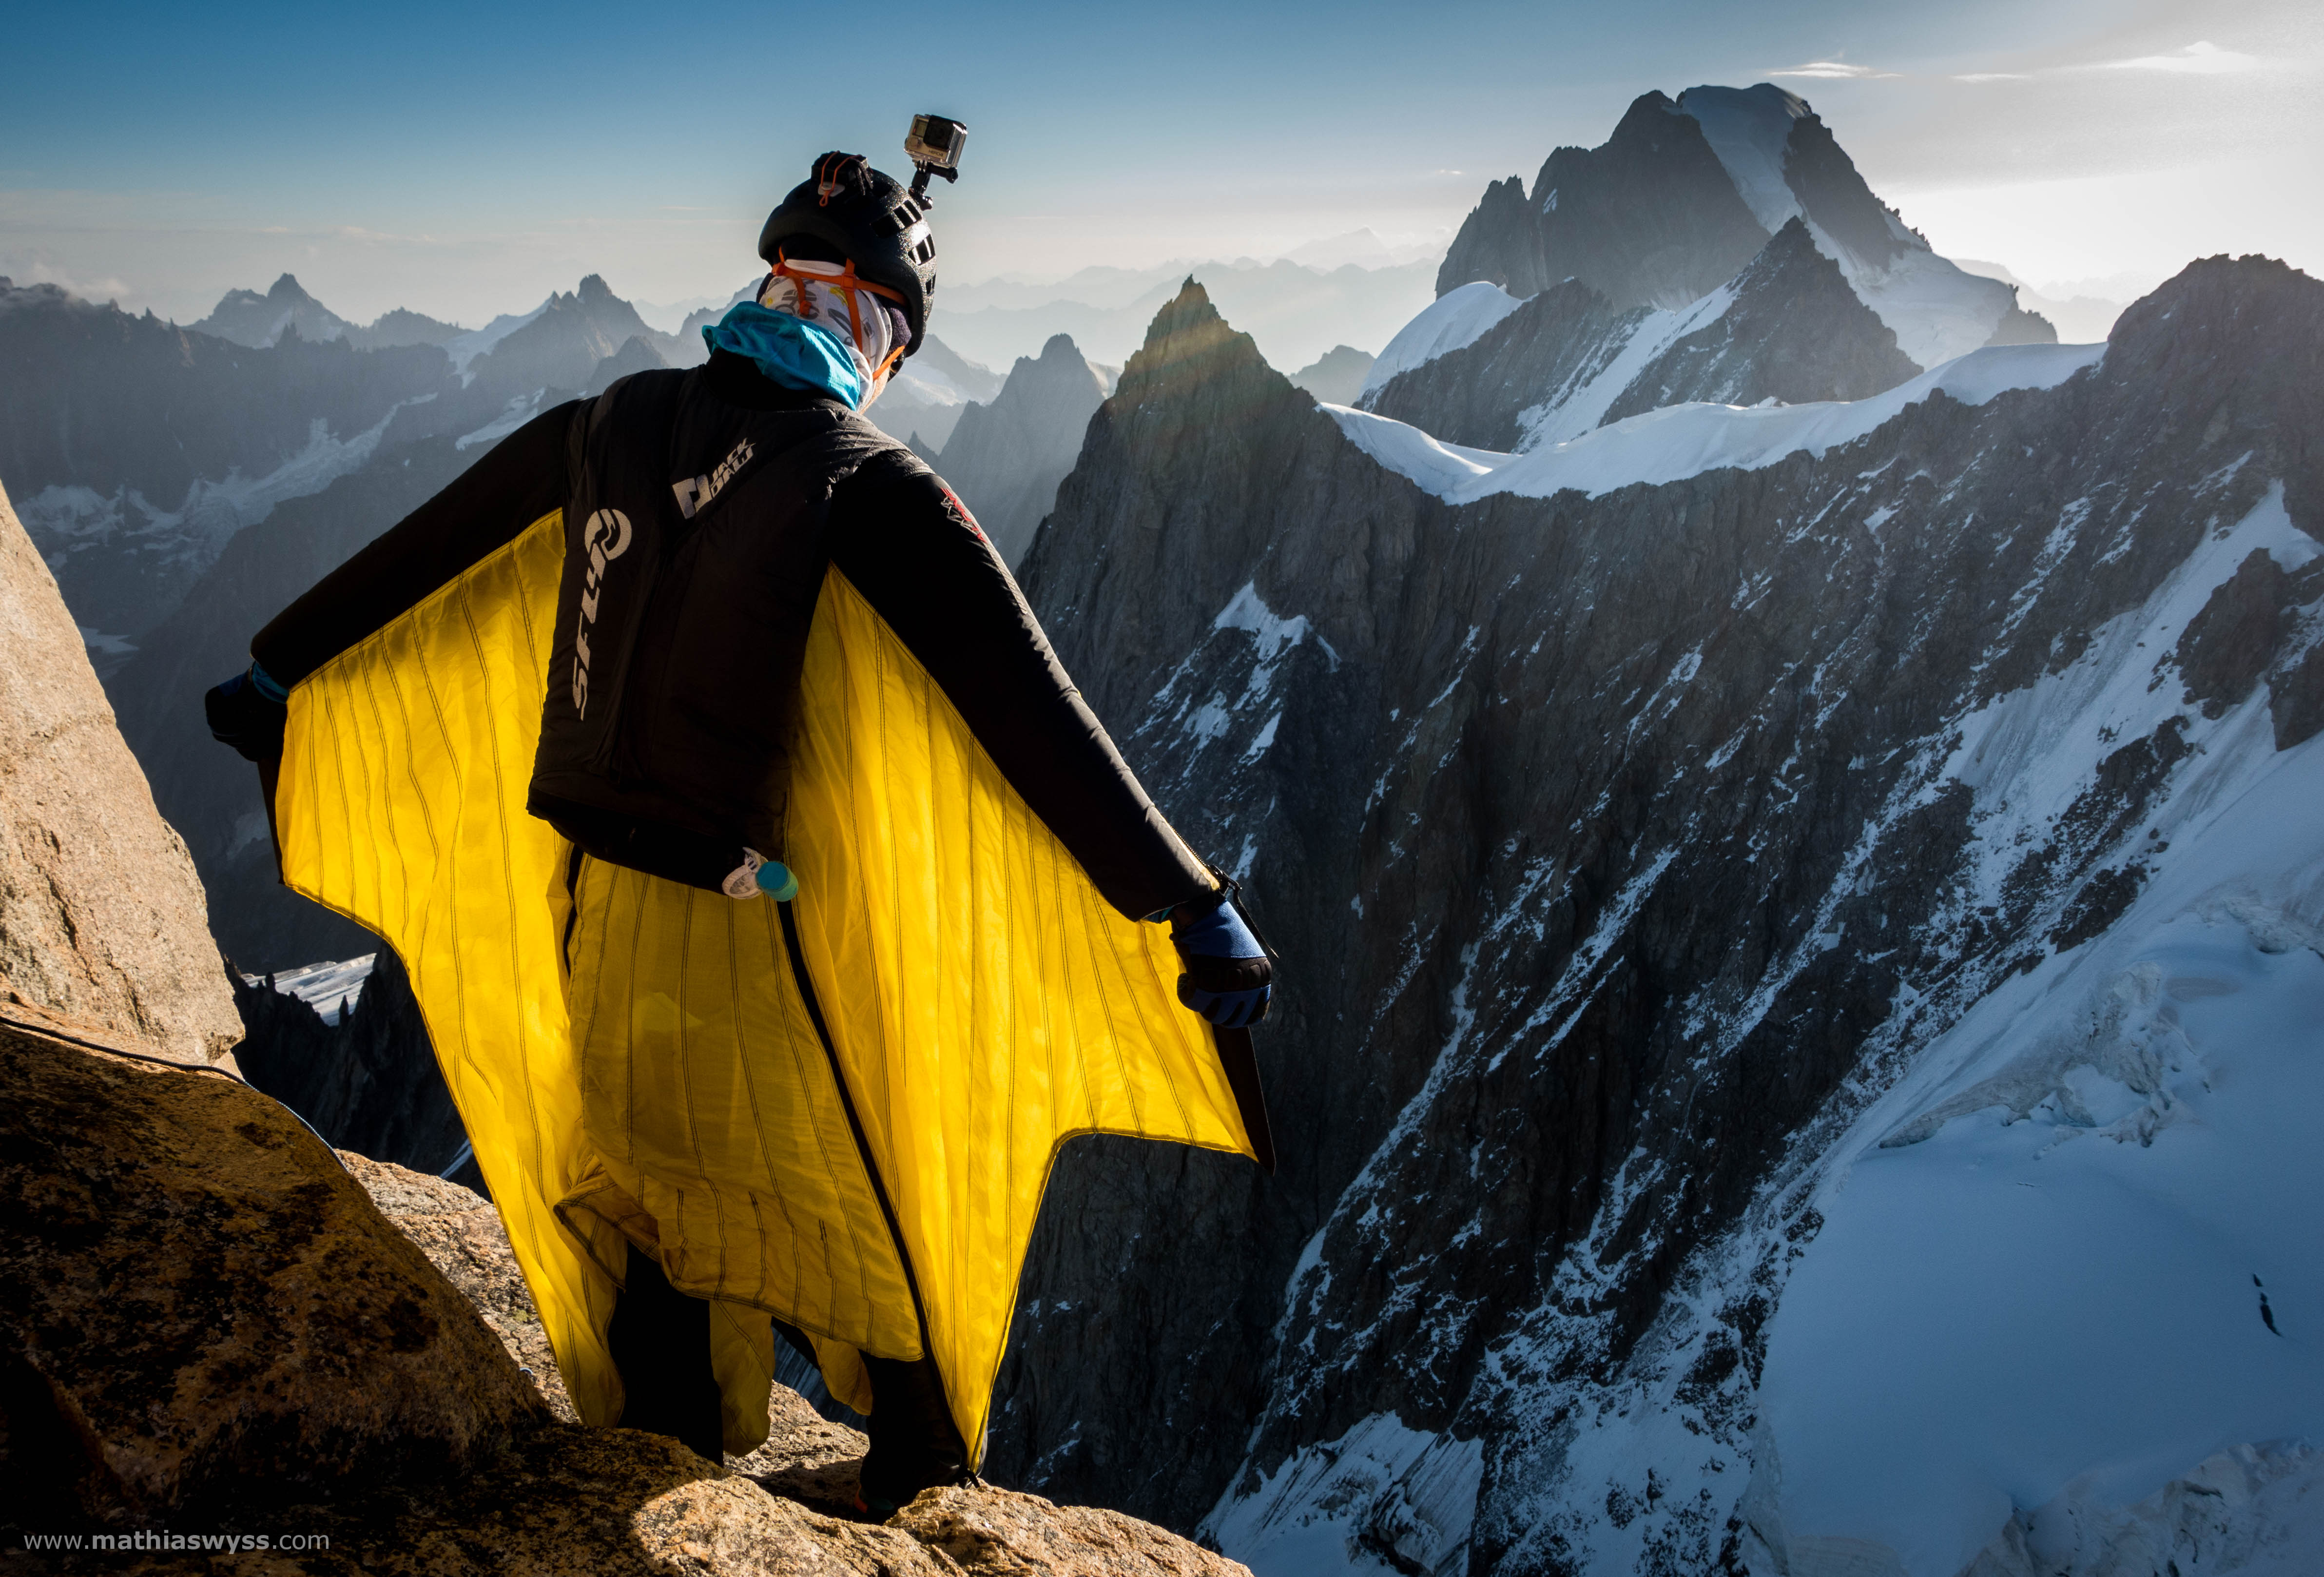 How cyber security can learn from wingsuit flying: the inconvenience halo